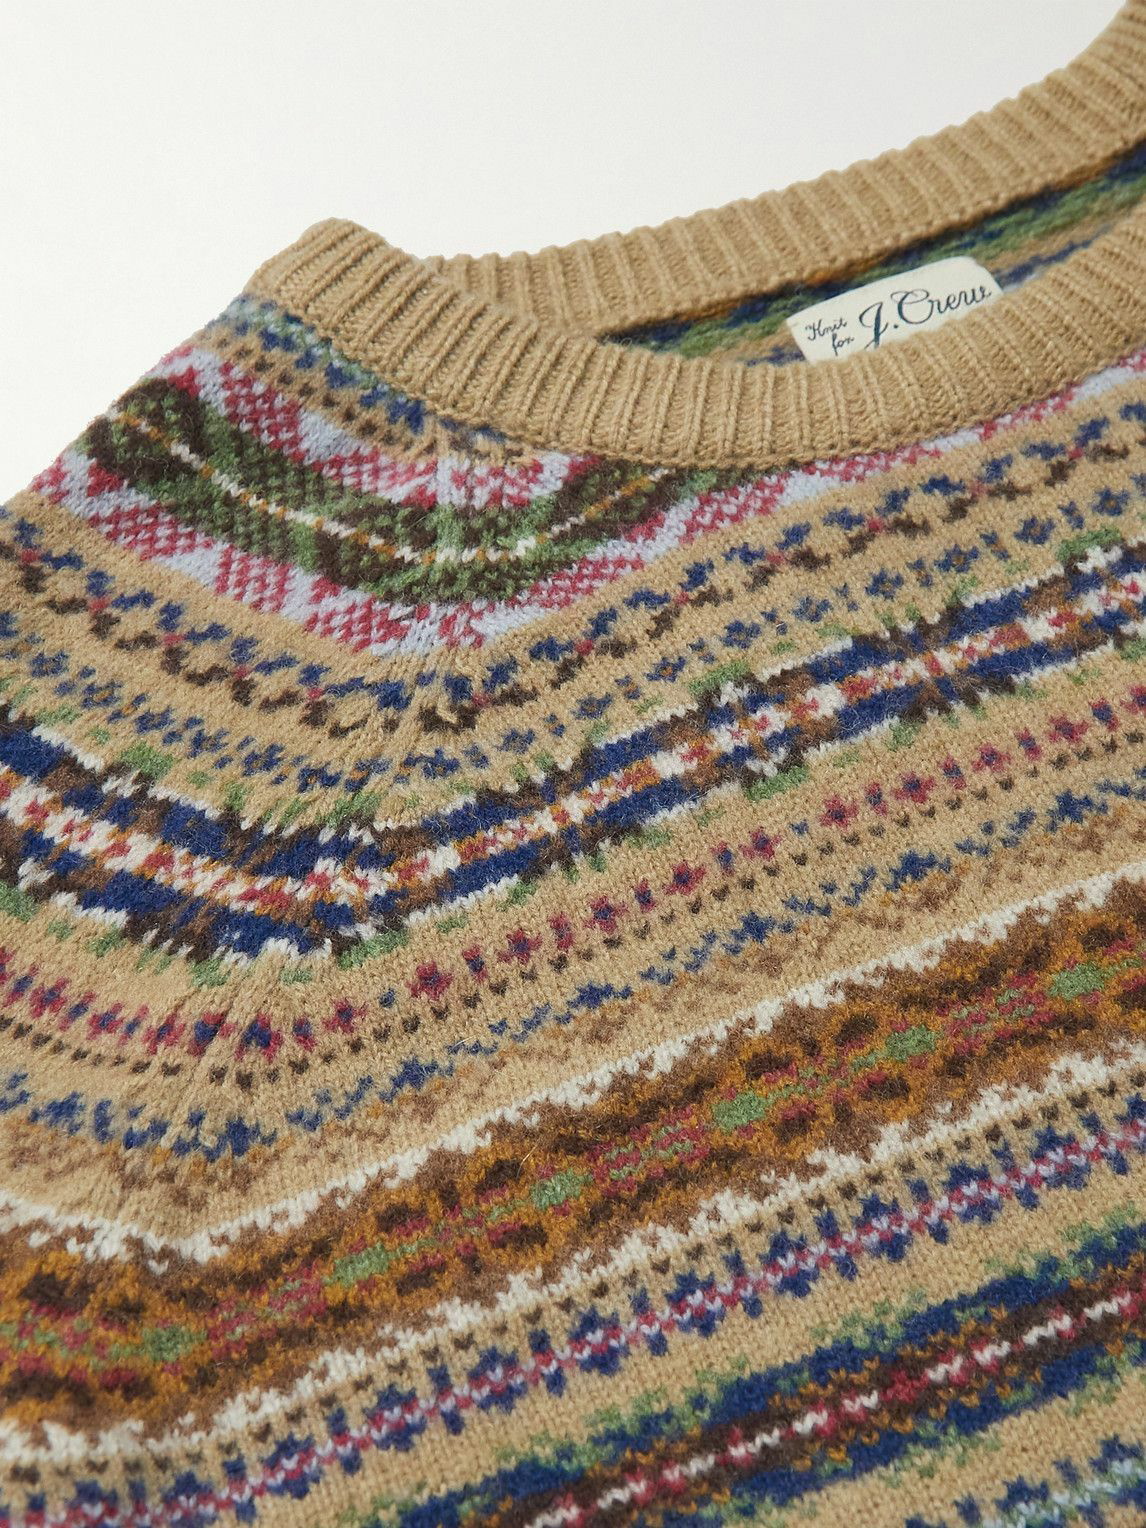 J.Crew: Cashmere Fair Isle Cardigan Sweater With Jewel Buttons For Women